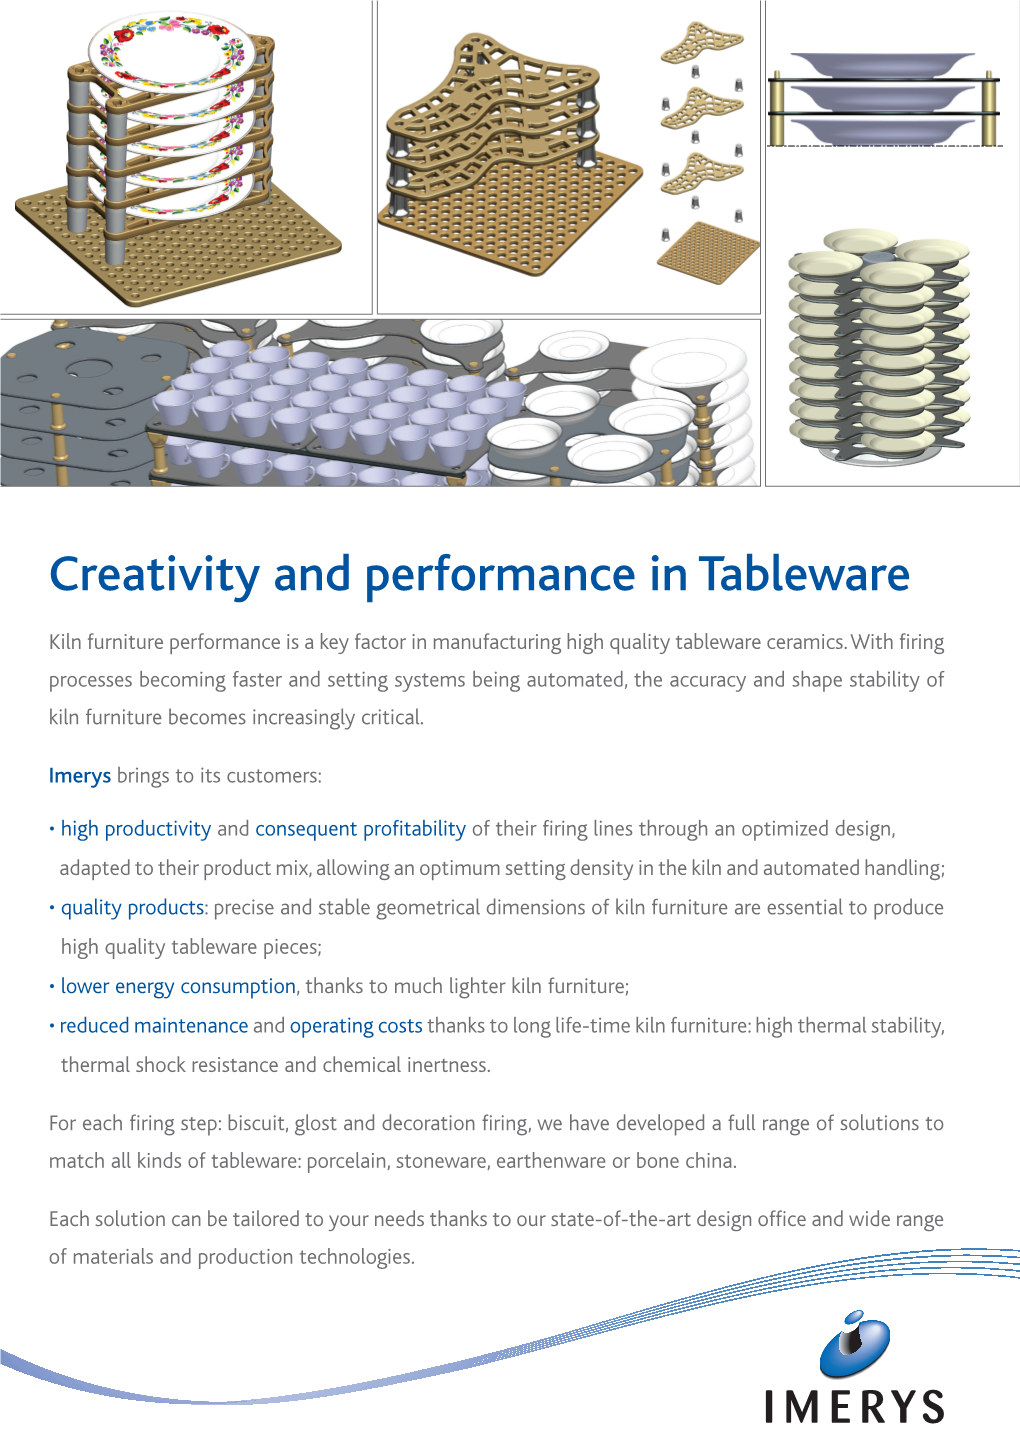 Creativity and Performance in Tableware